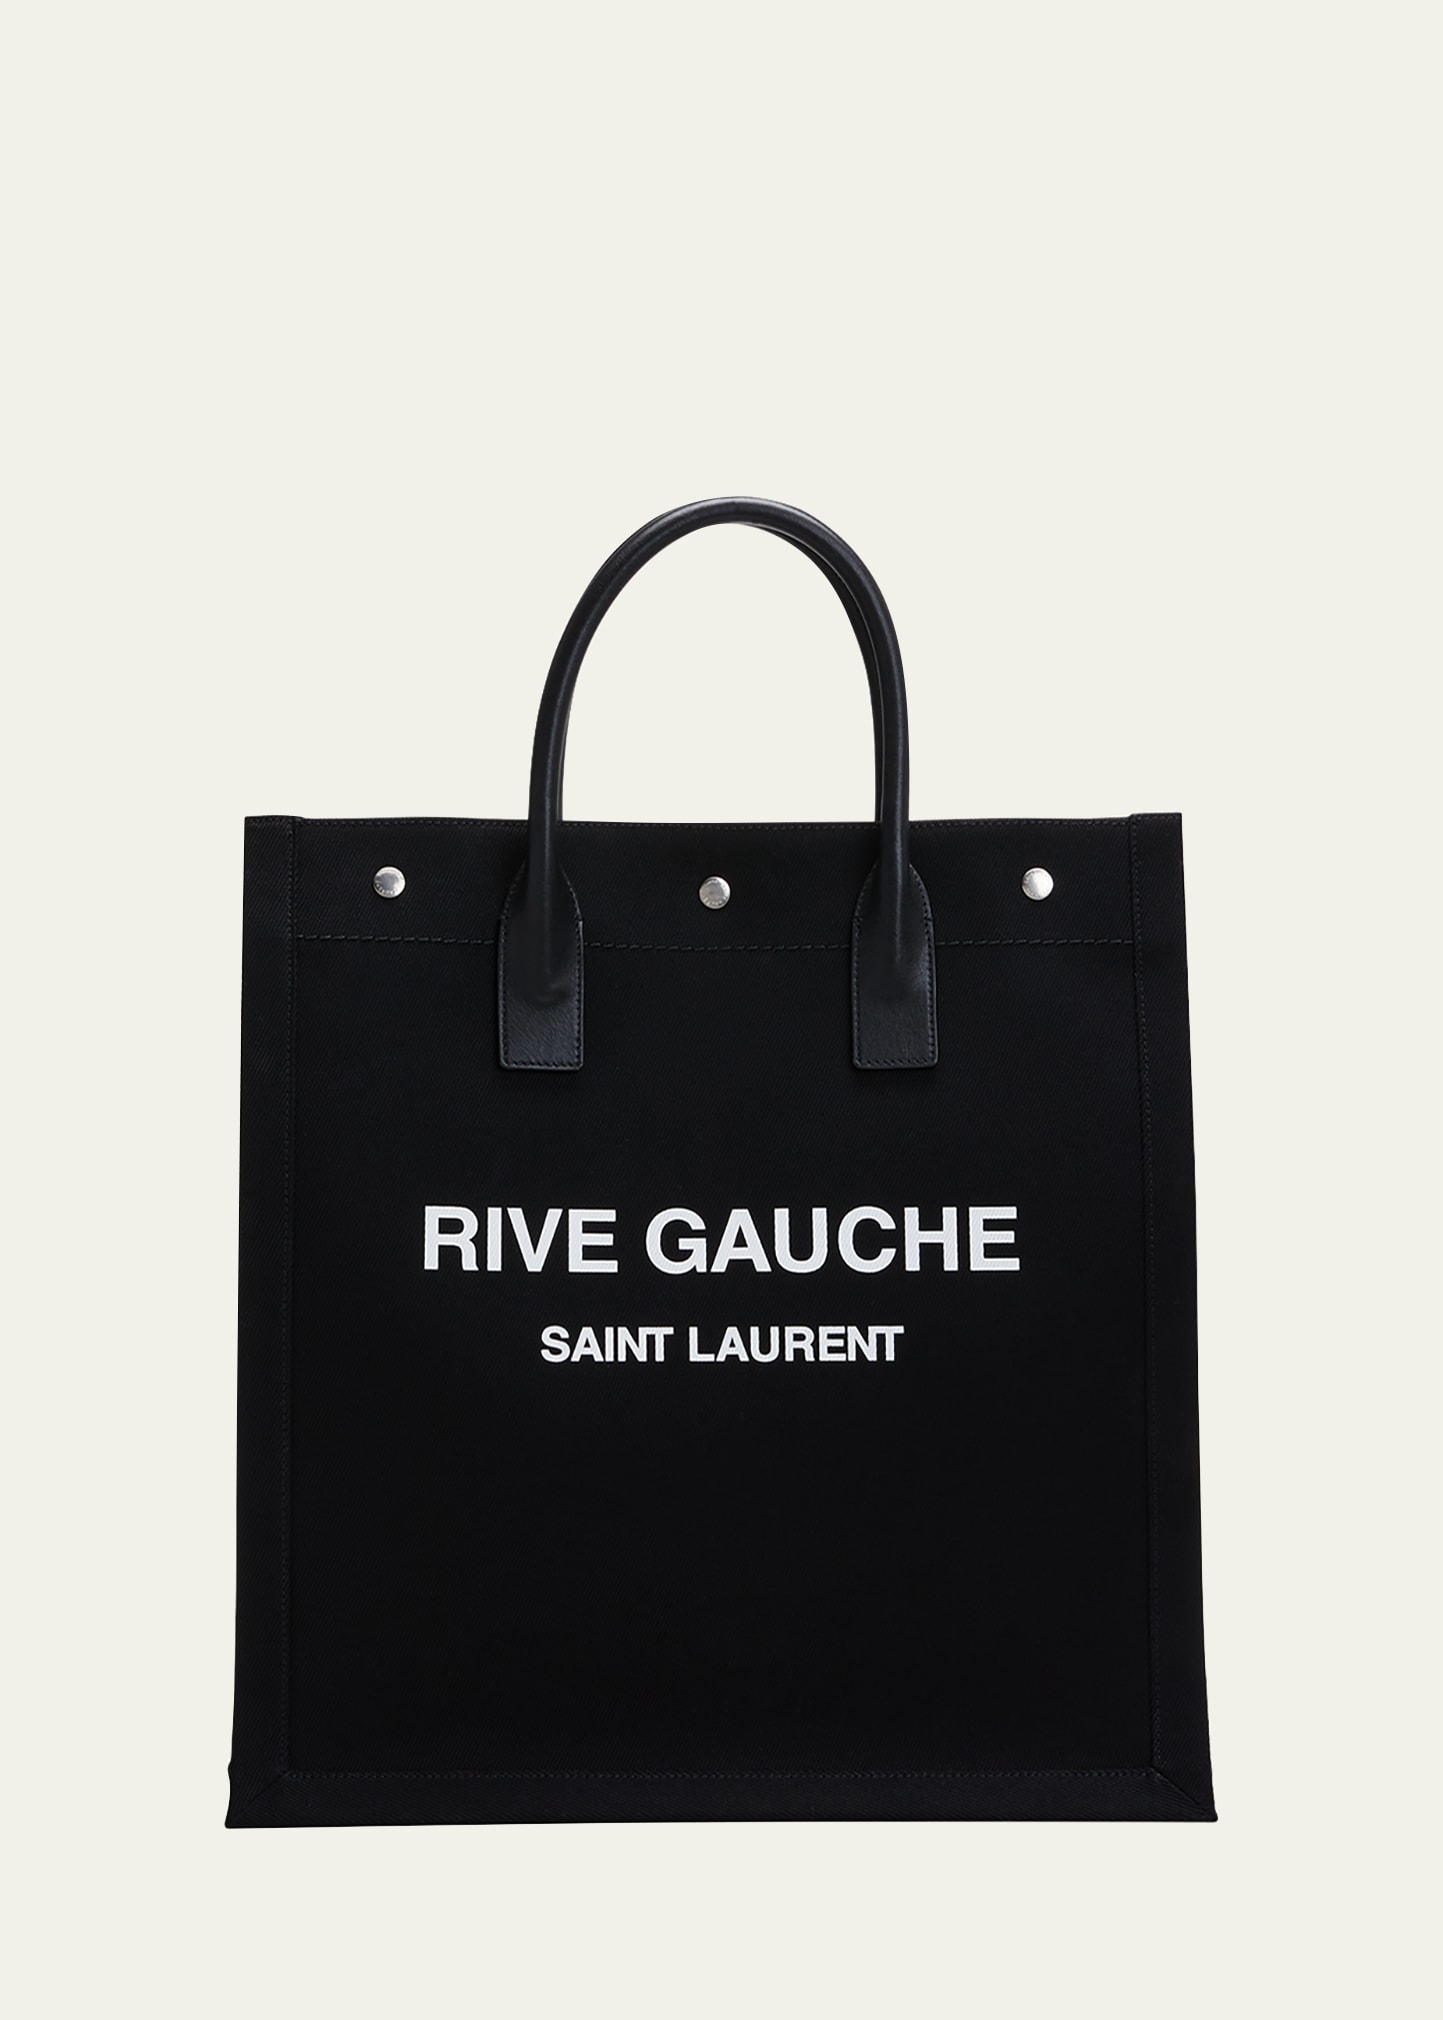 SAINT LAURENT Rive Gauche Tote Bag via our love @e.s.j.a.y 🖤 ​​​​​​​​  ​​​​​​​​ With its ample storage and signature logo, you will look…